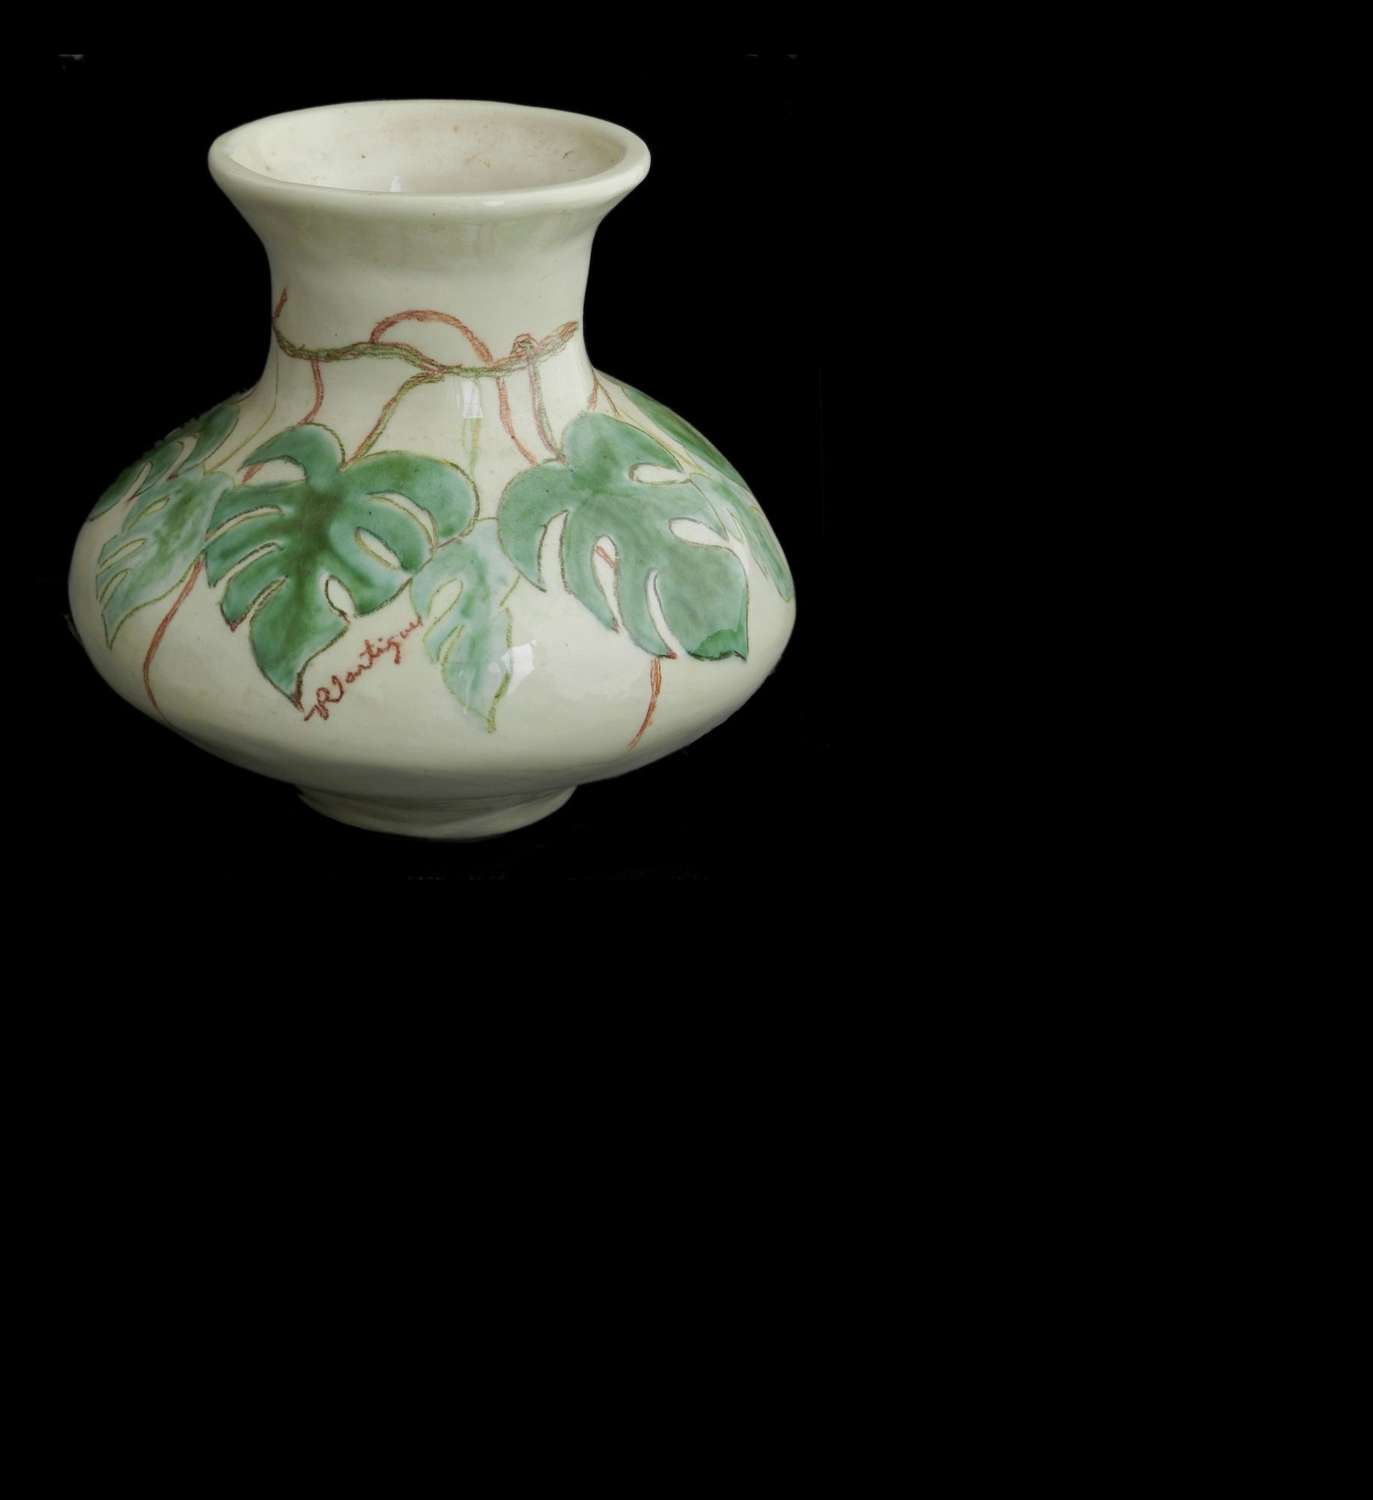 Vintage French Faience Vase Signed by Artist